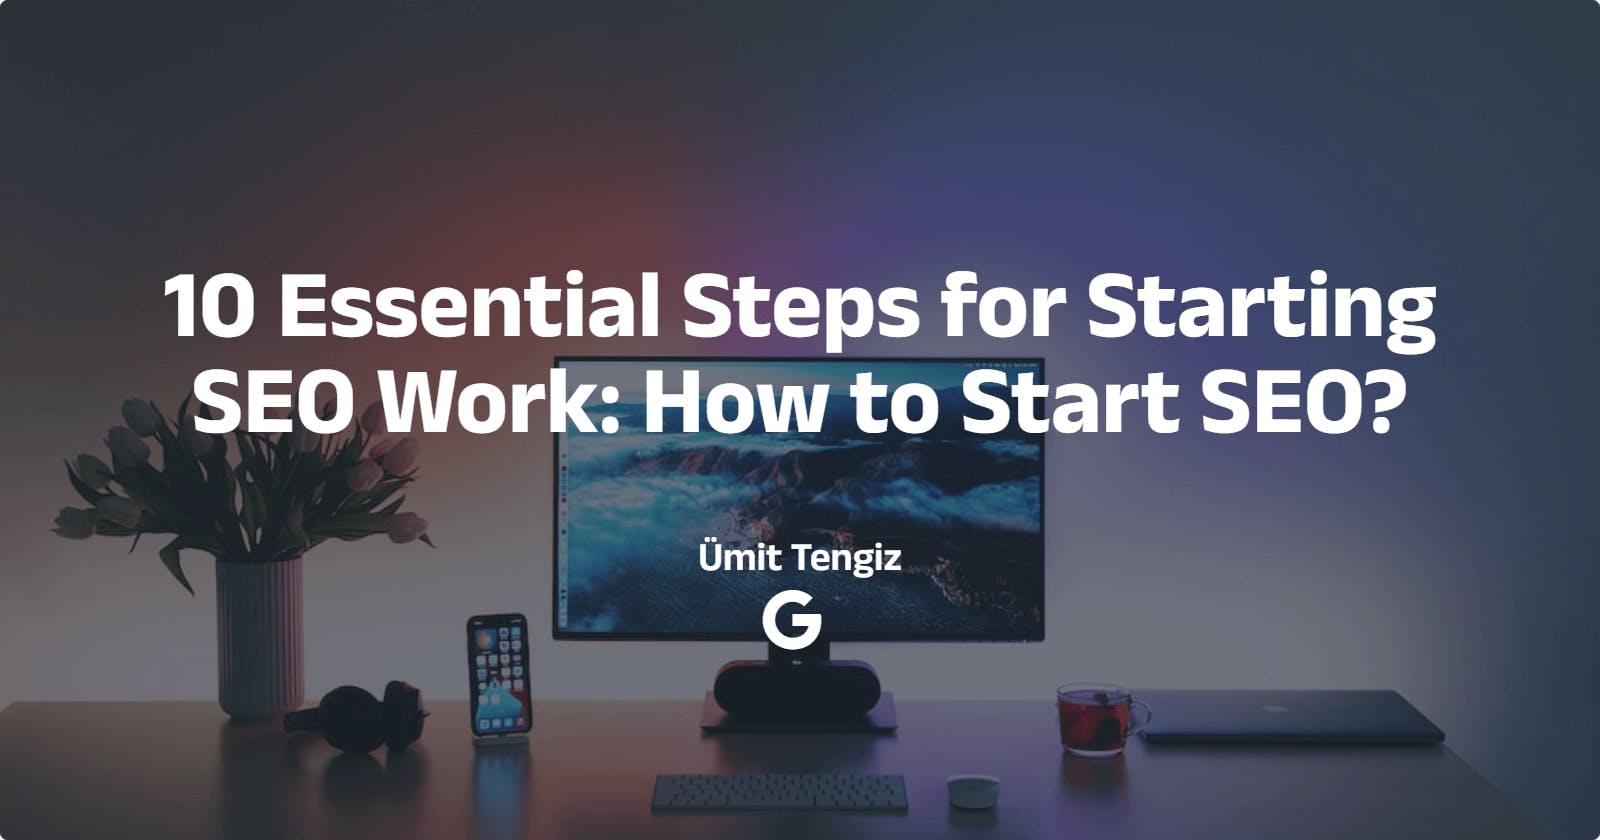 10 Essential Steps for Starting SEO Work: How to Start SEO?